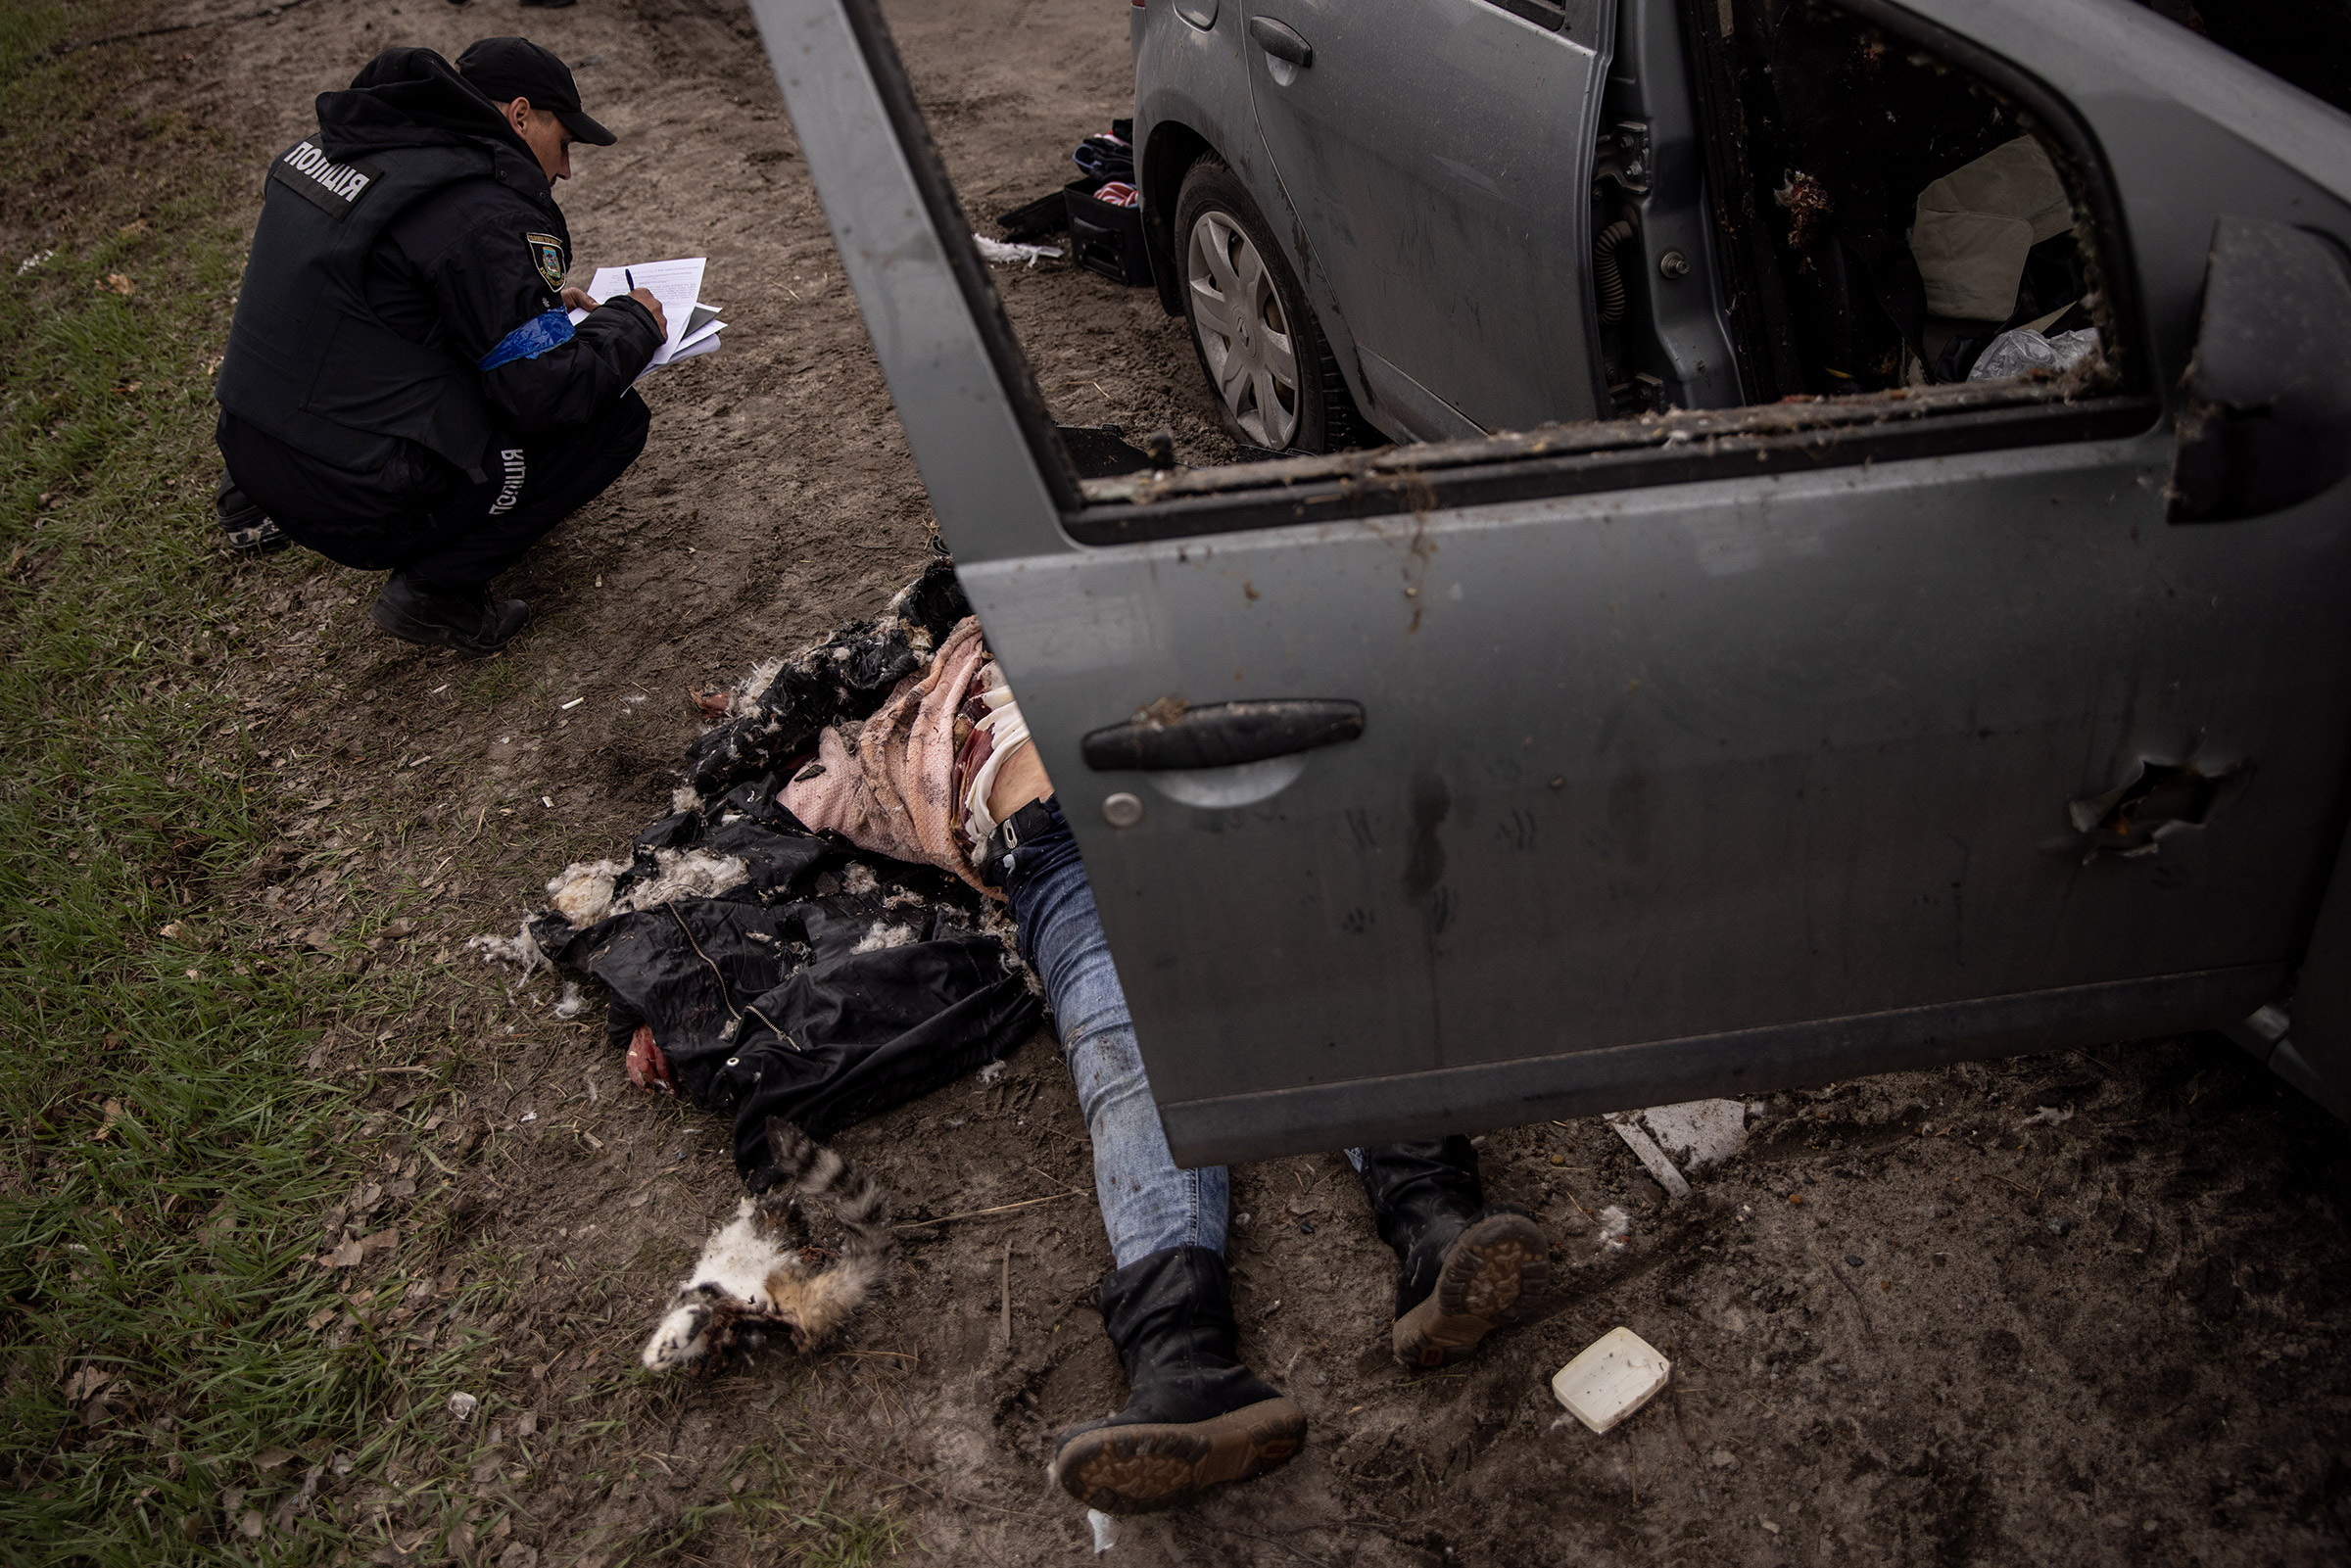 A police officer takes details after a woman's body was found in a car shot in Bucha, Ukraine, on April 6, 2022. (Chris McGrath—Getty Images)